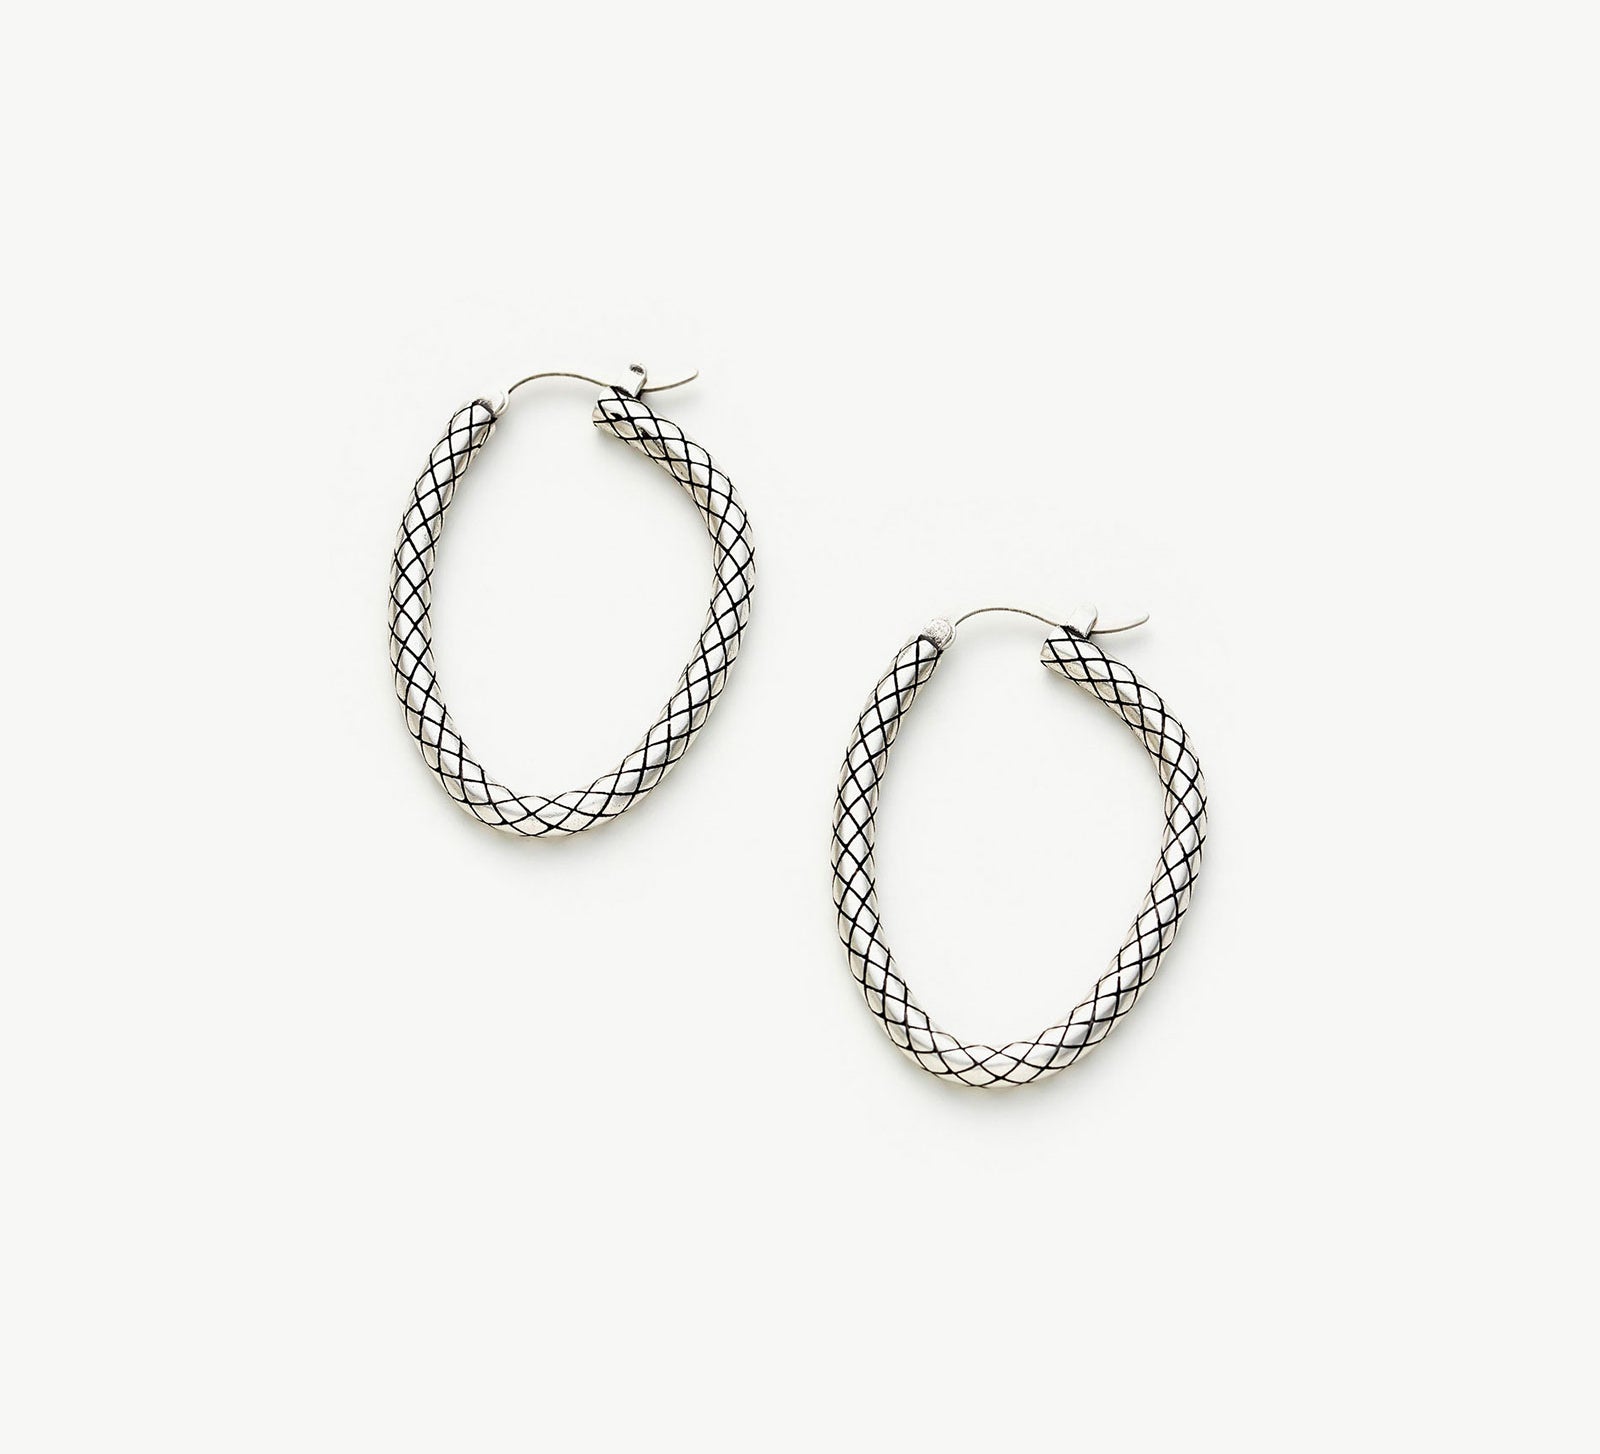 Front Facing Hoop Earrings, a chic and modern accessory designed to face forward, adding a contemporary twist to classic hoop elegance